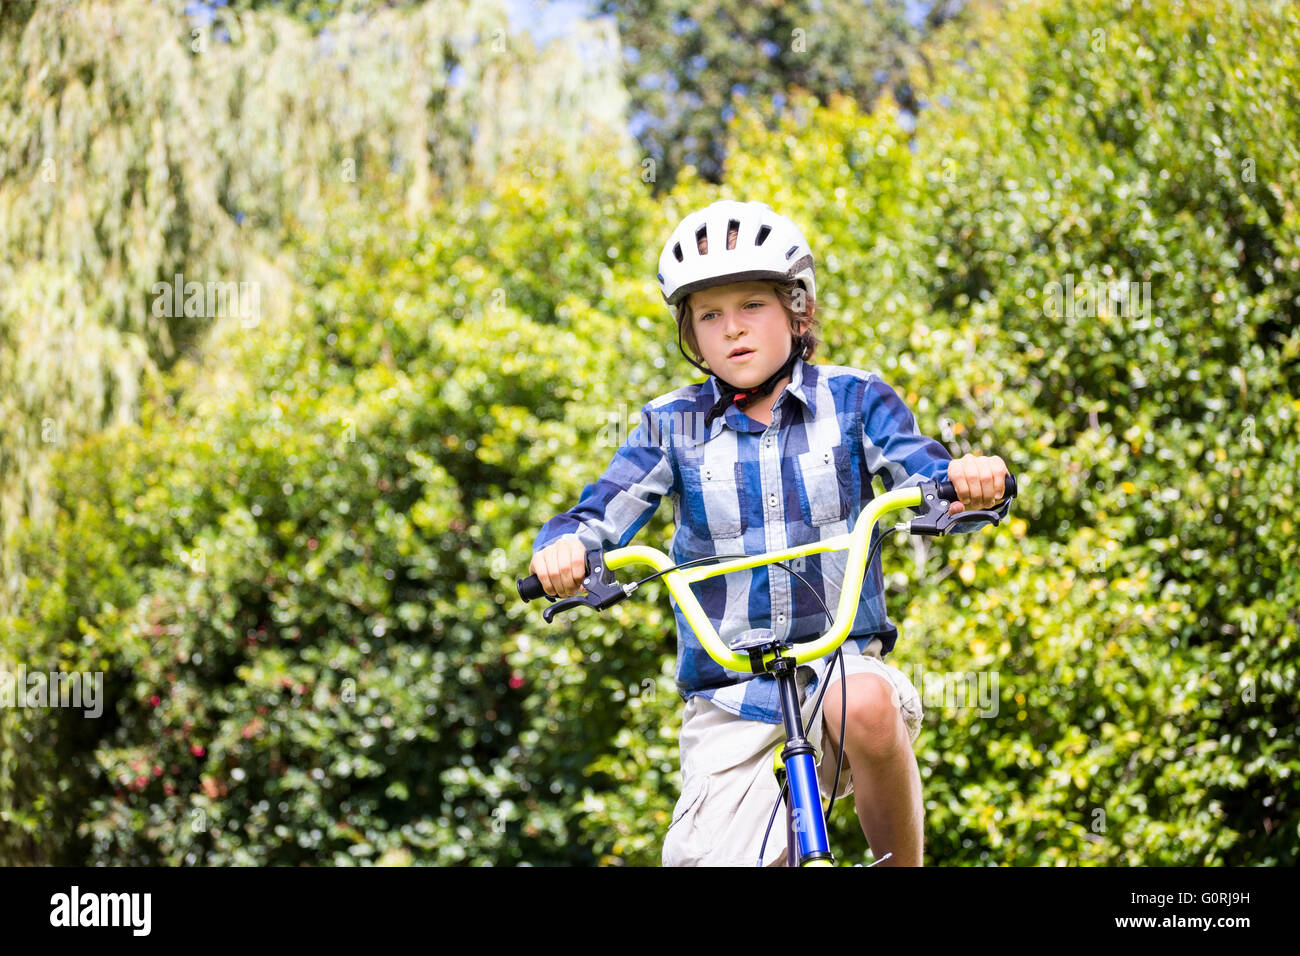 Portrait of boy smiling and riding bike Stock Photo